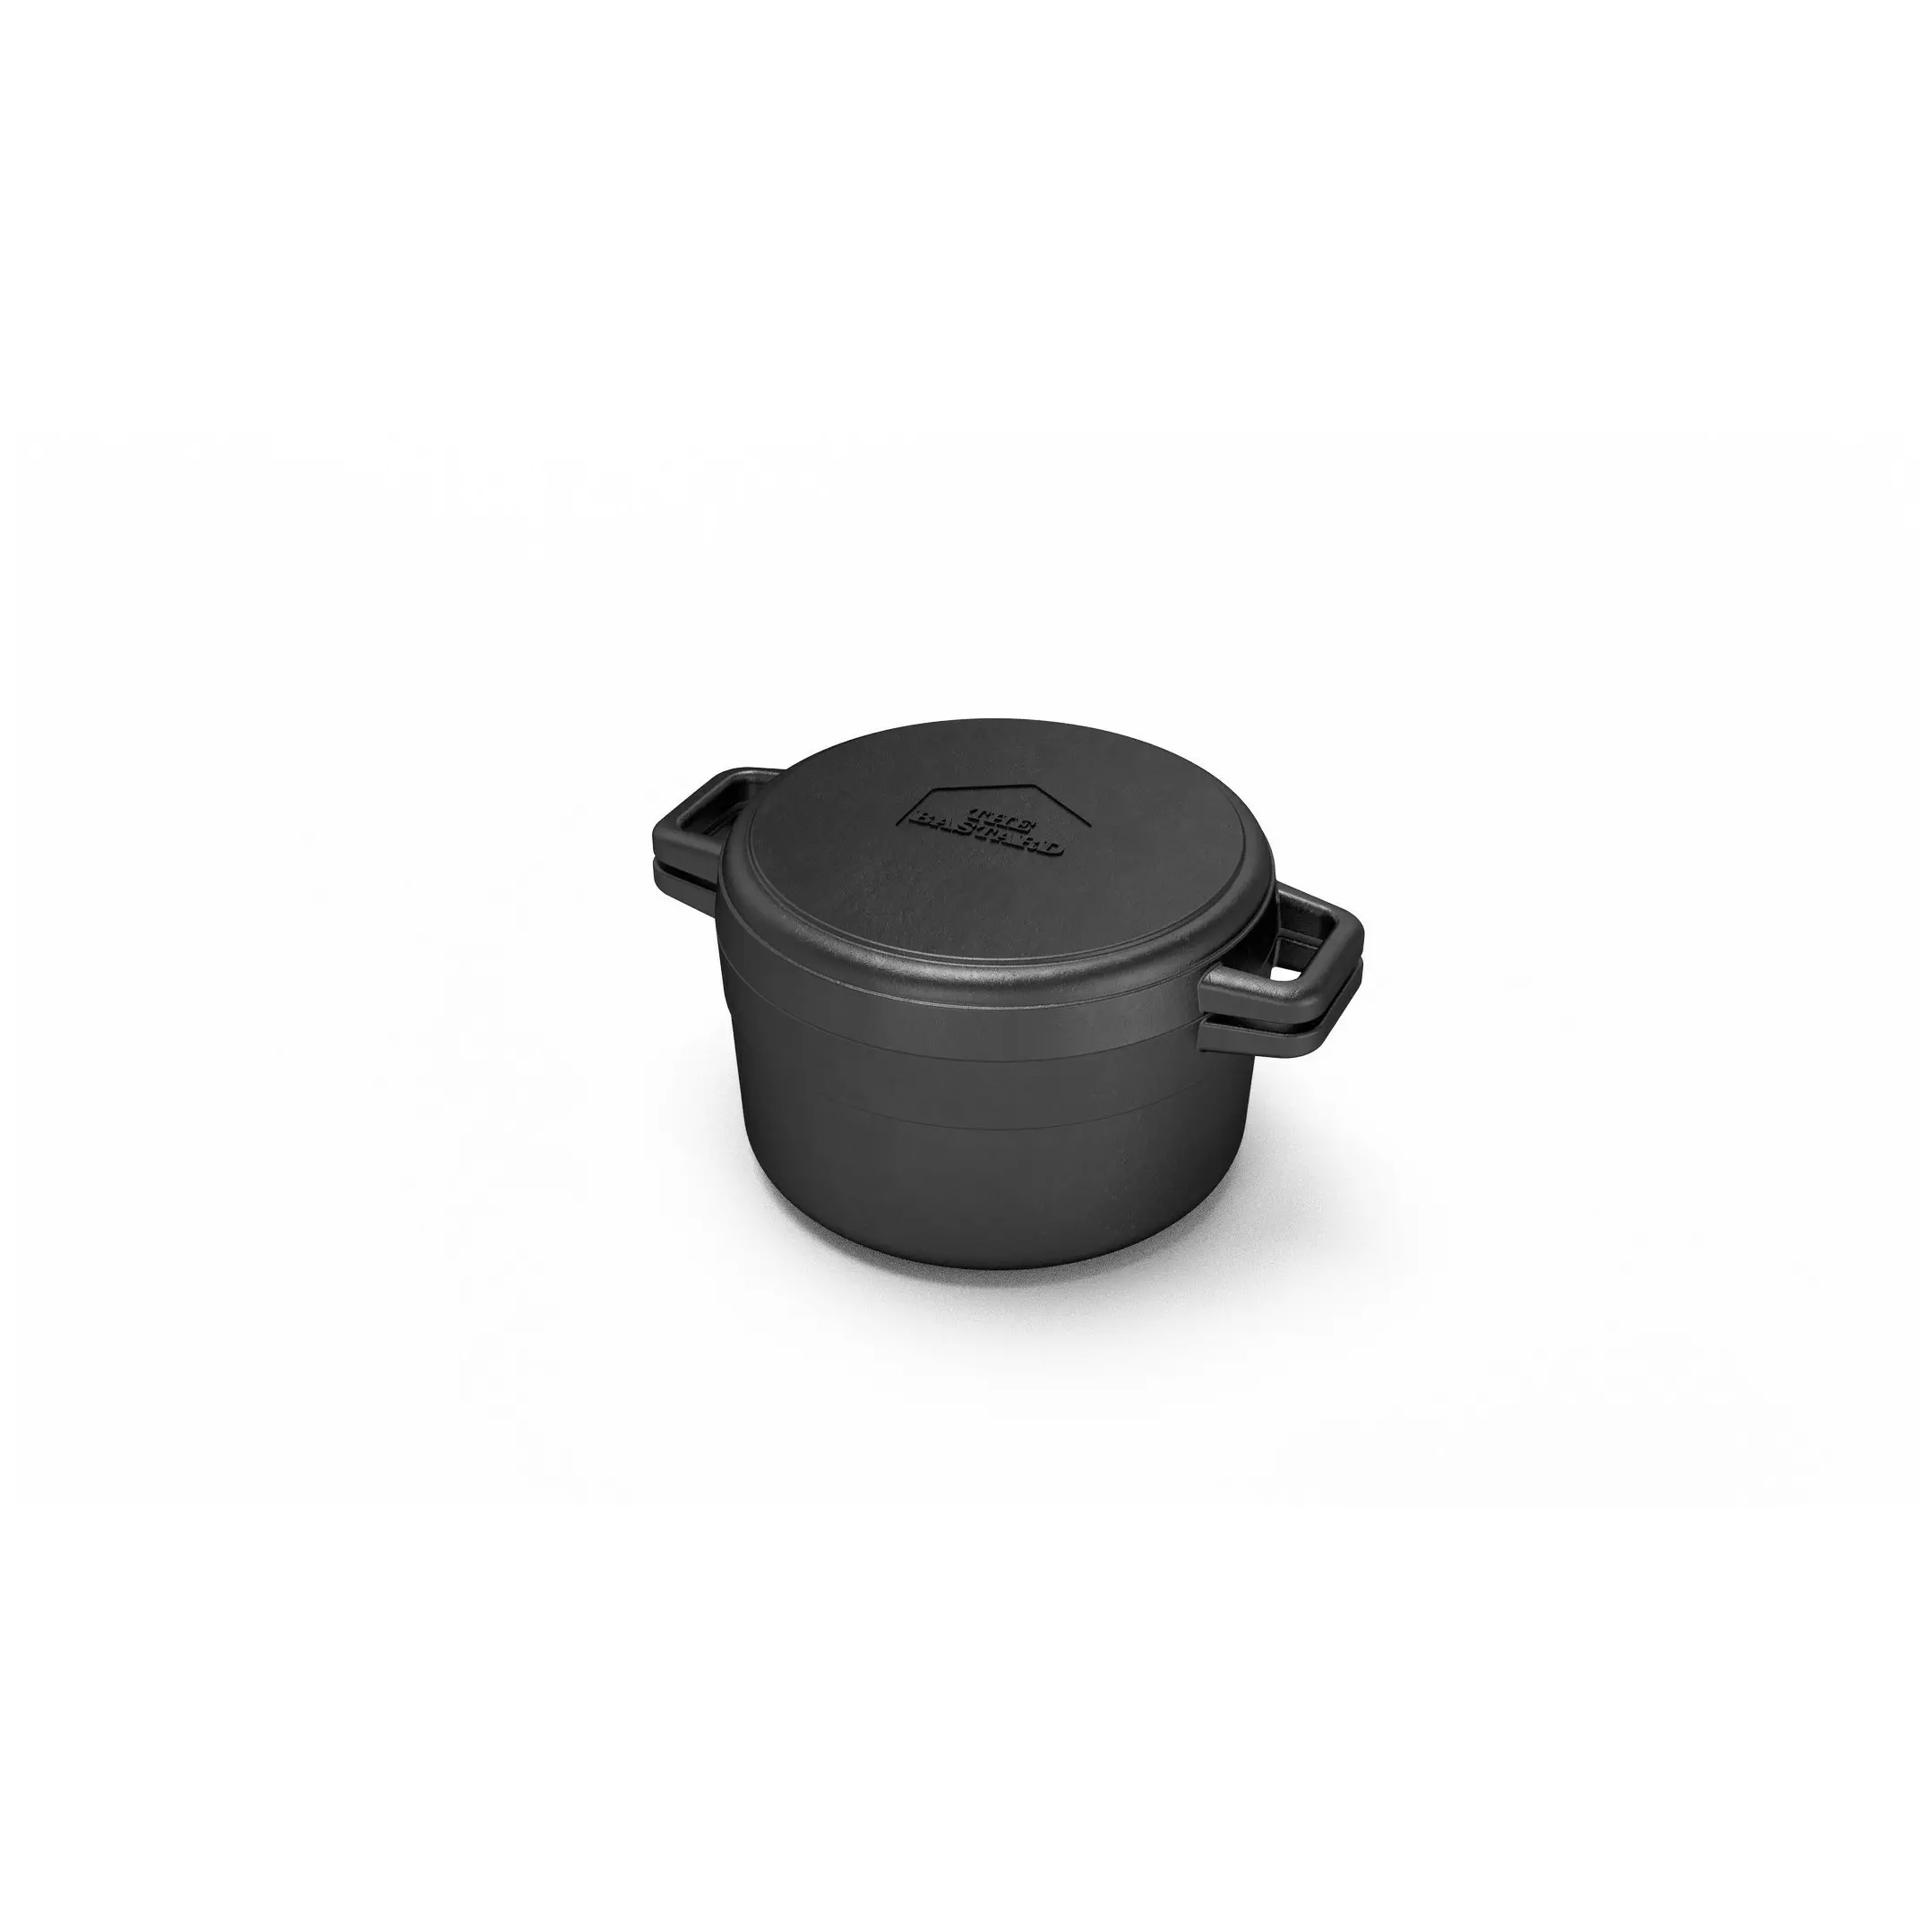 The Bastard Dutch Oven & Griddle Small S